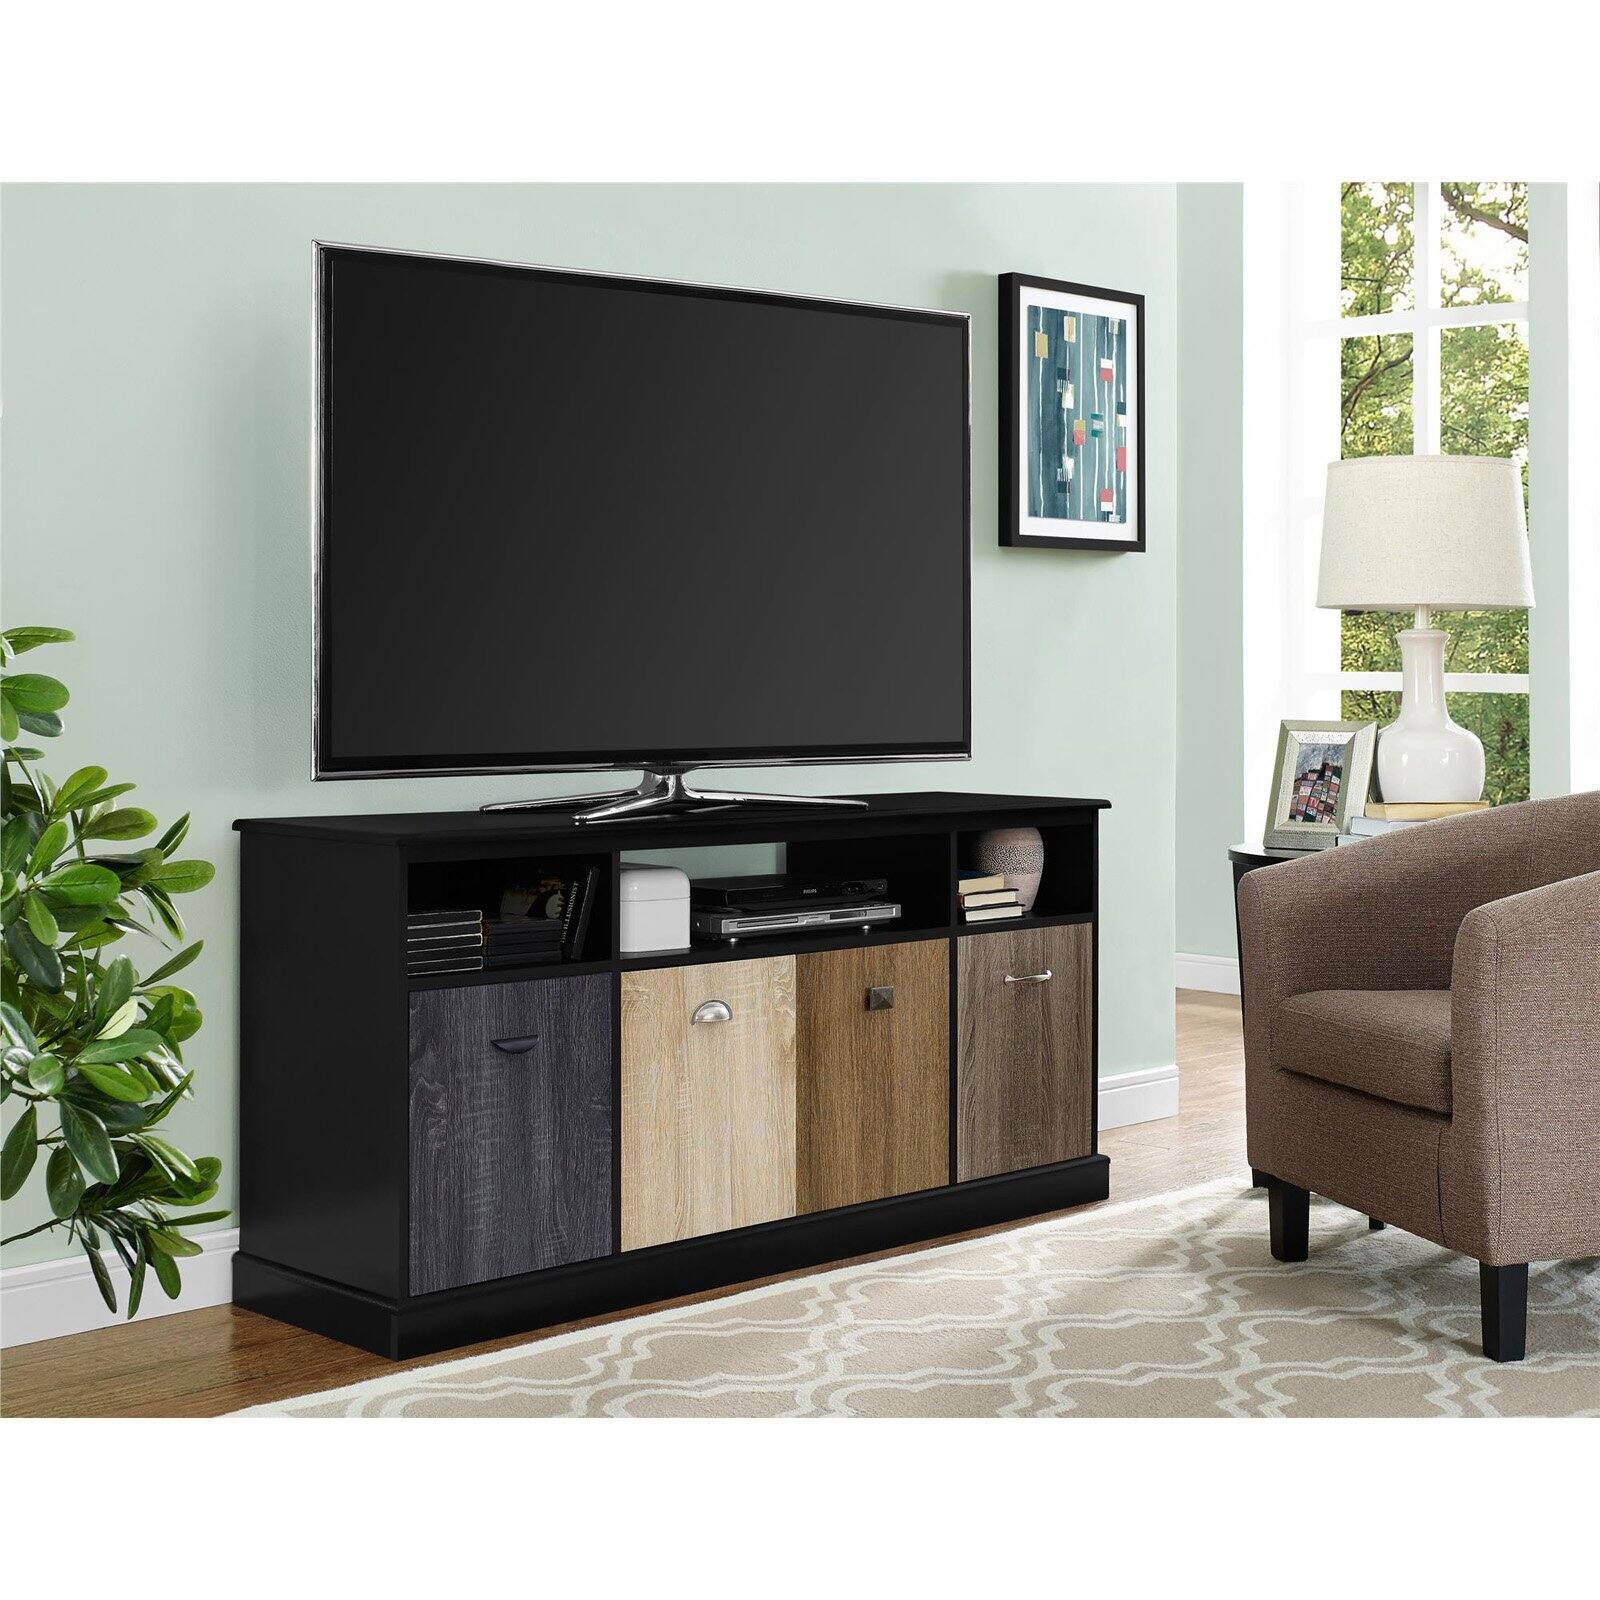 Ameriwood Home Mercer 60" TV Console with Multicolored Door Fronts, Multiple Colors - Black - image 2 of 5